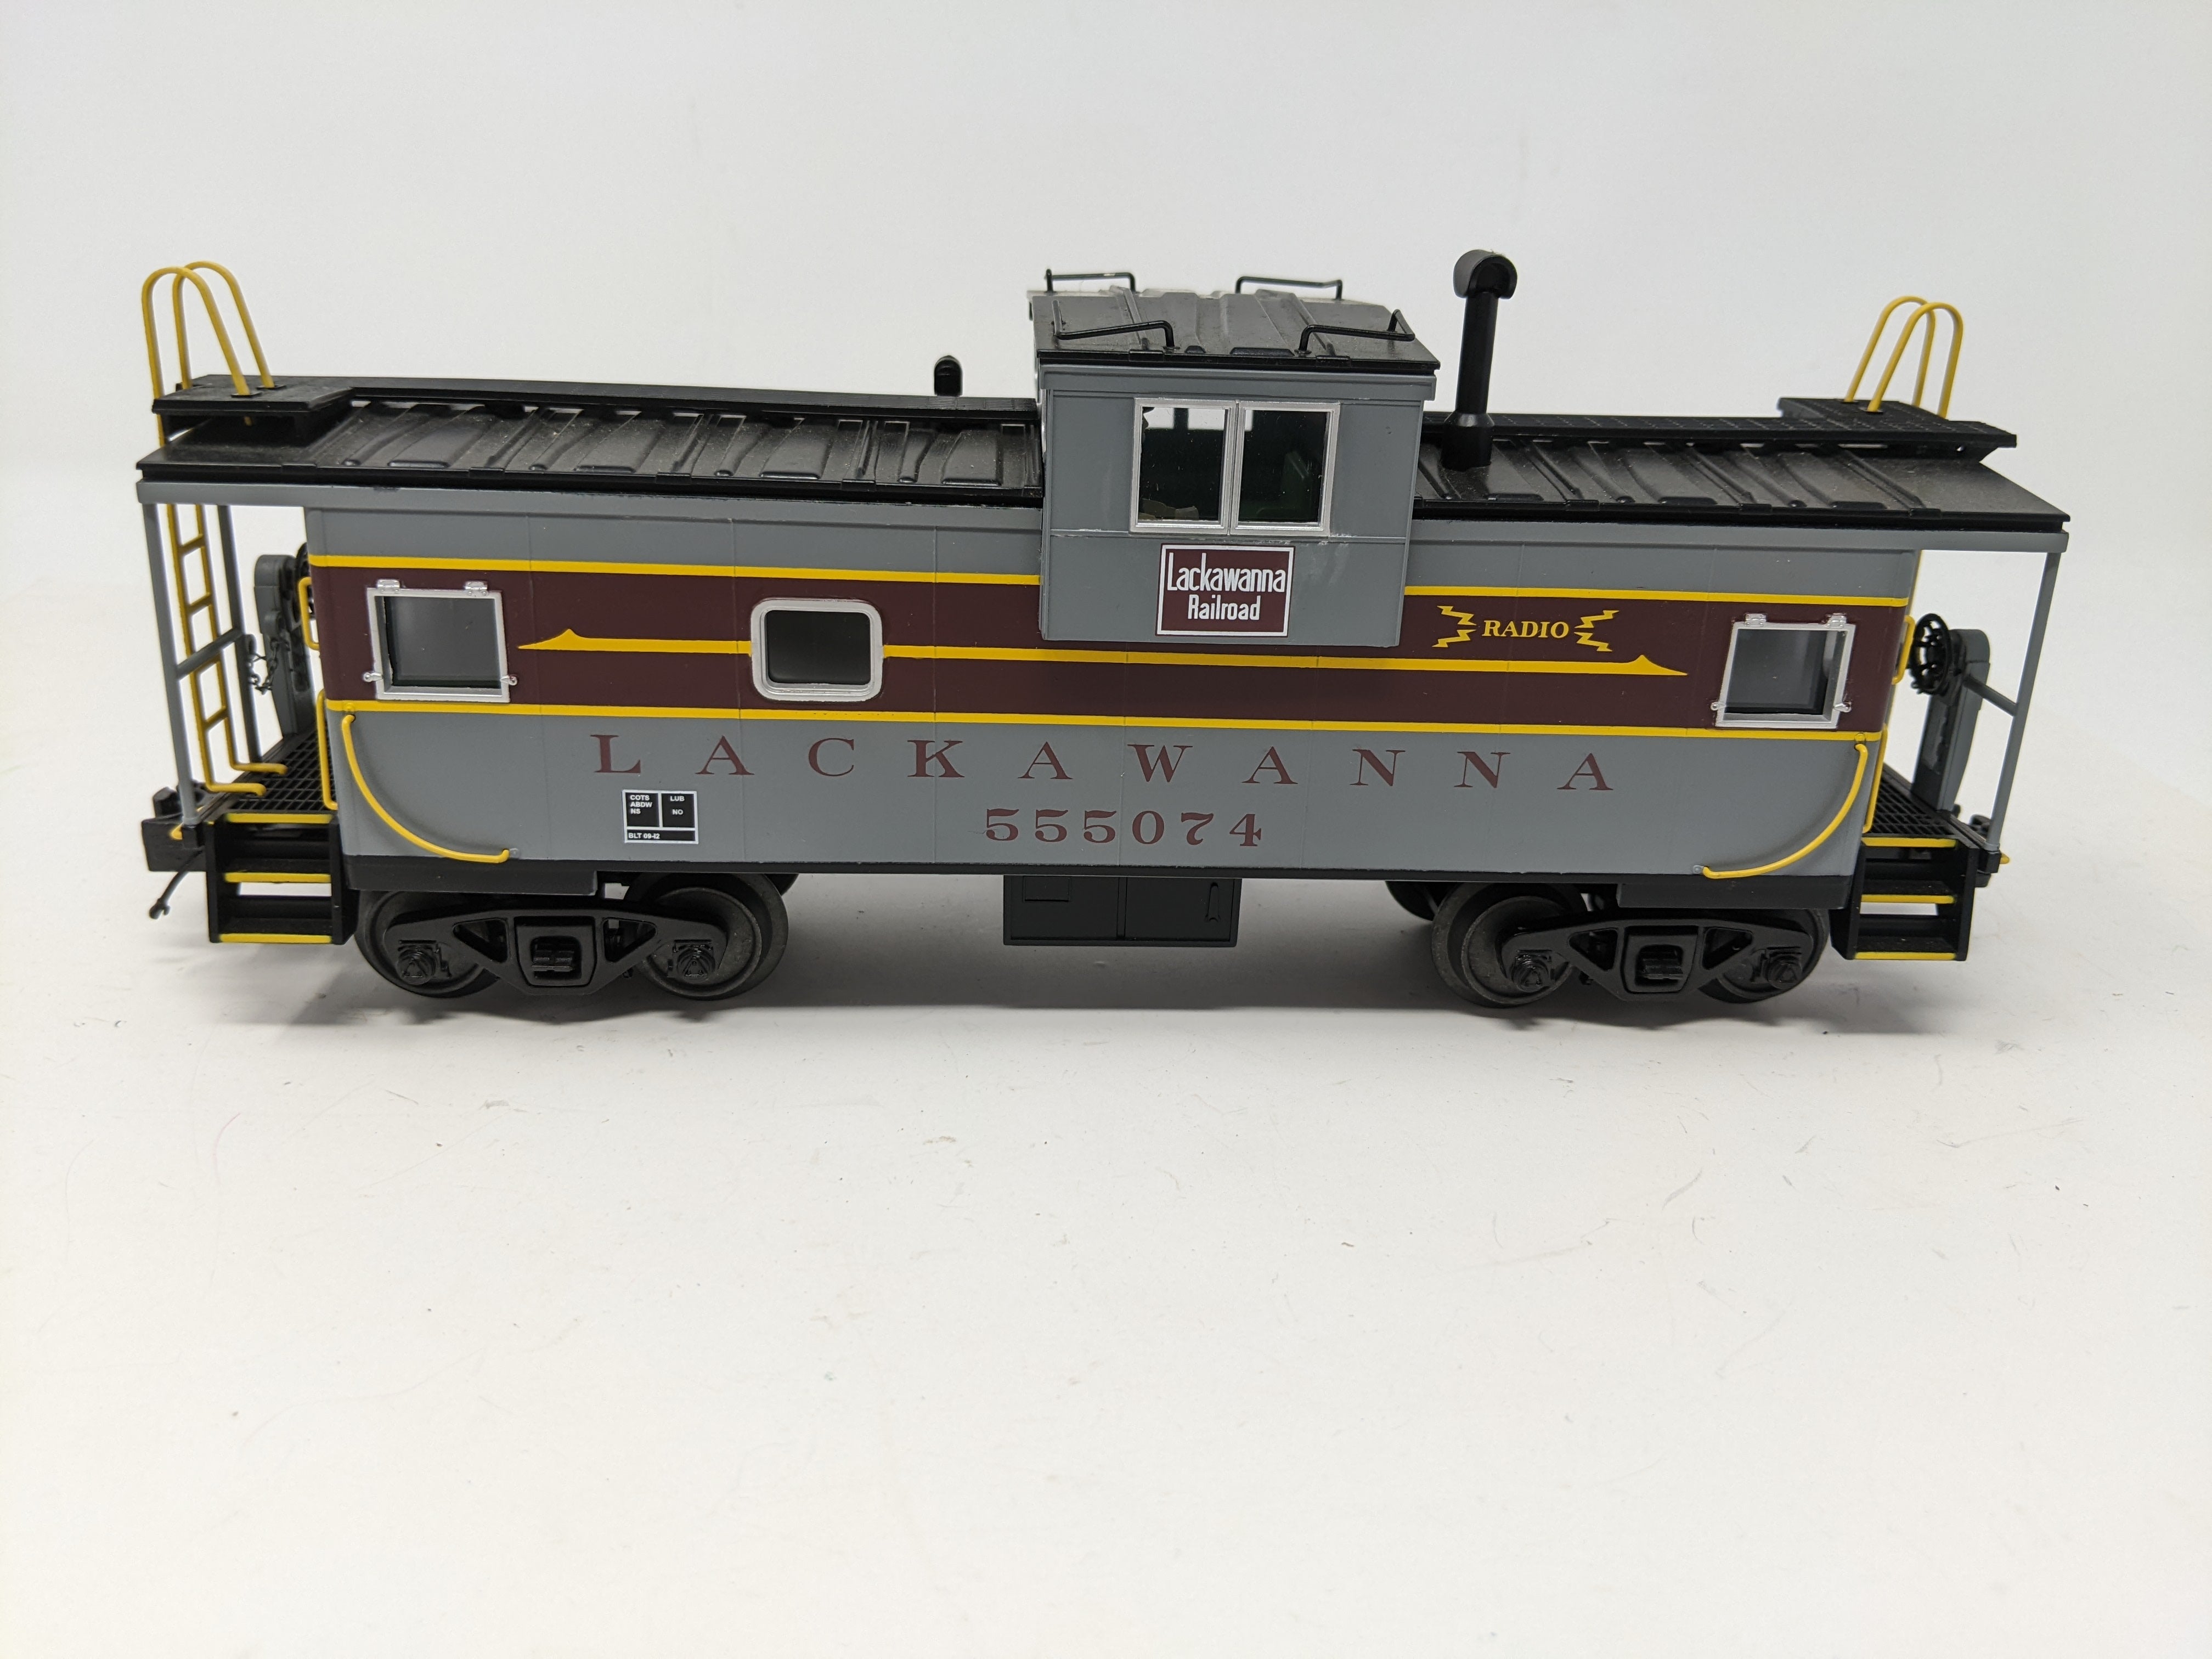 USED MTH Premier 20-91395 O, Extended Vision Caboose NS Heritage Series, Lackawanna #555074